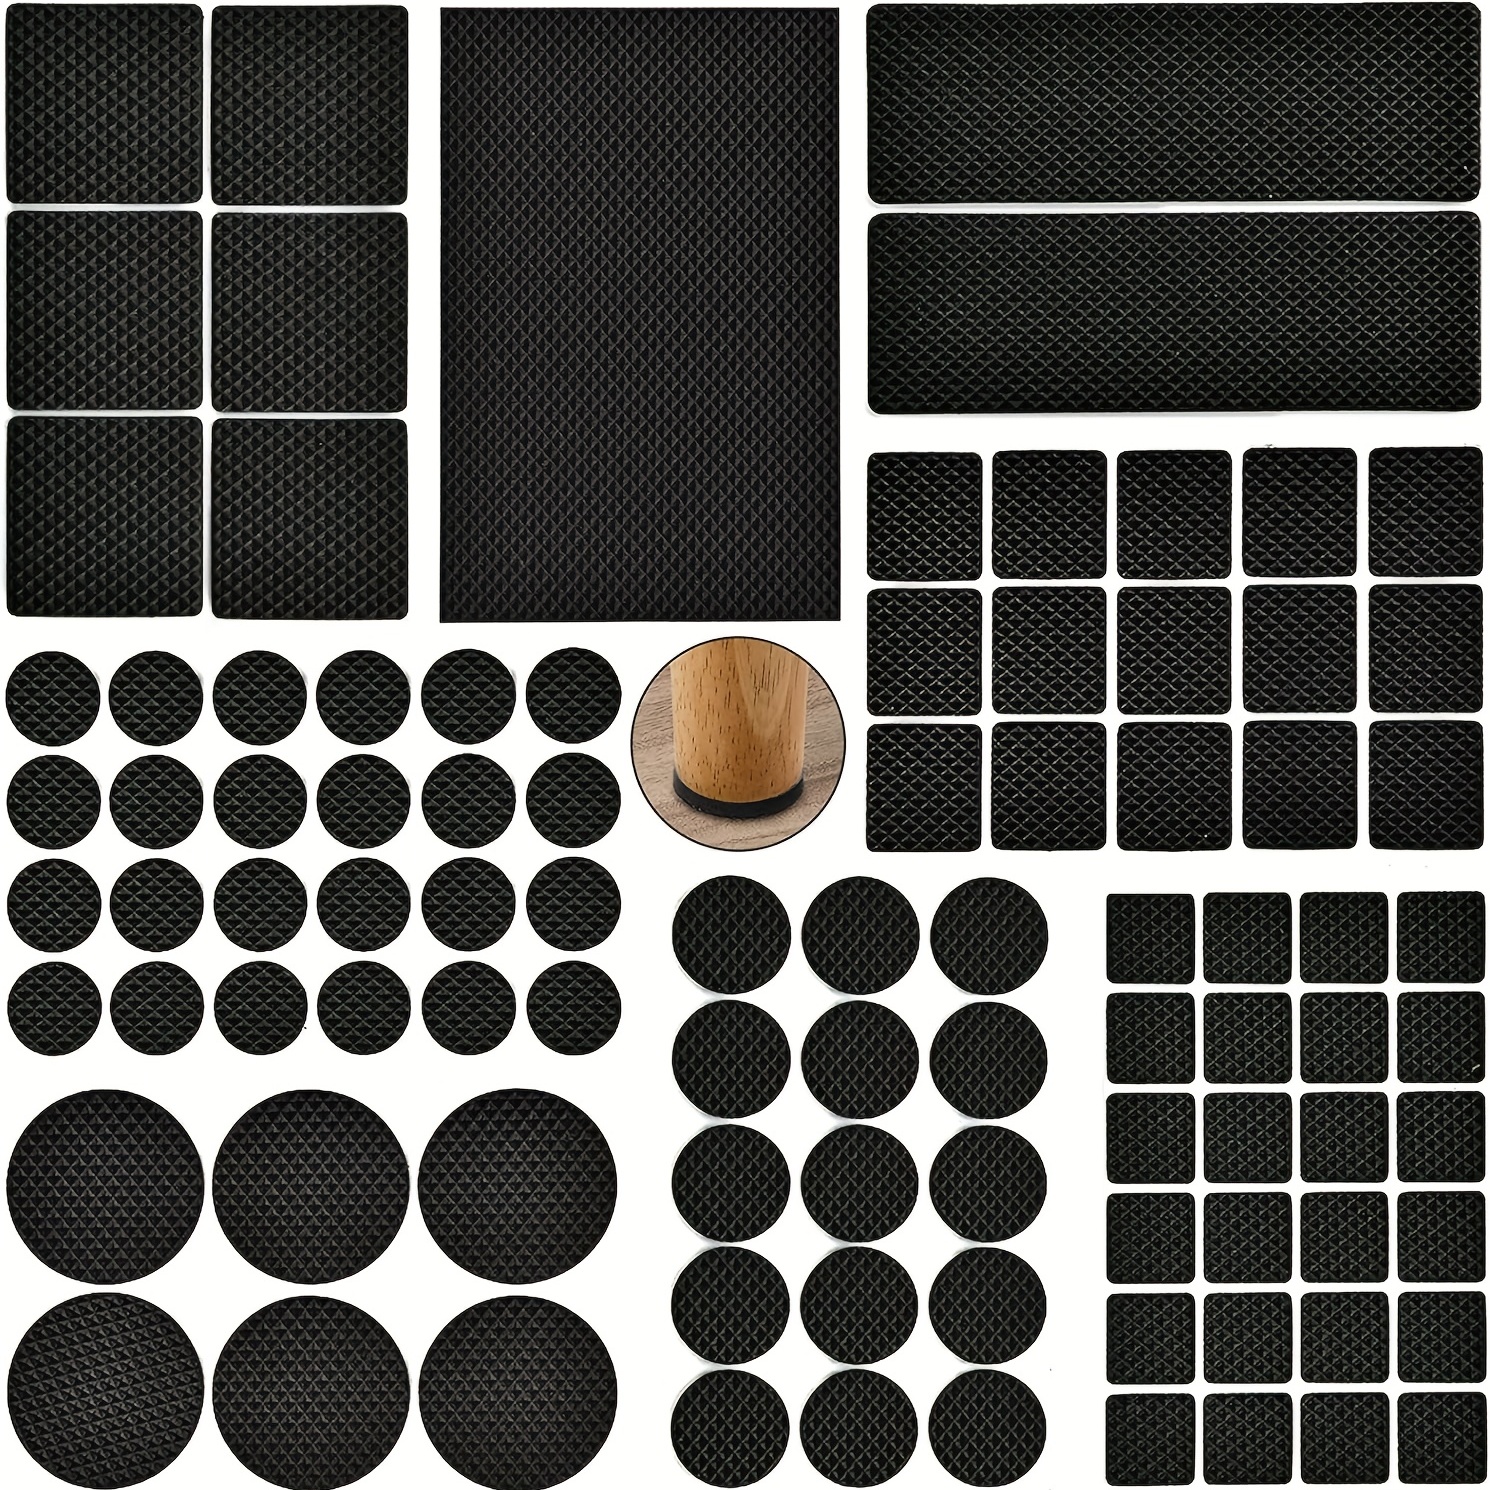 Wrap-Around Felt Floor Saver TAODAN 16PCS Long and Short Size Black  Furniture Felt Pads with Hook Fasteners for Sled Chair, Chair Sled Floor  Glides